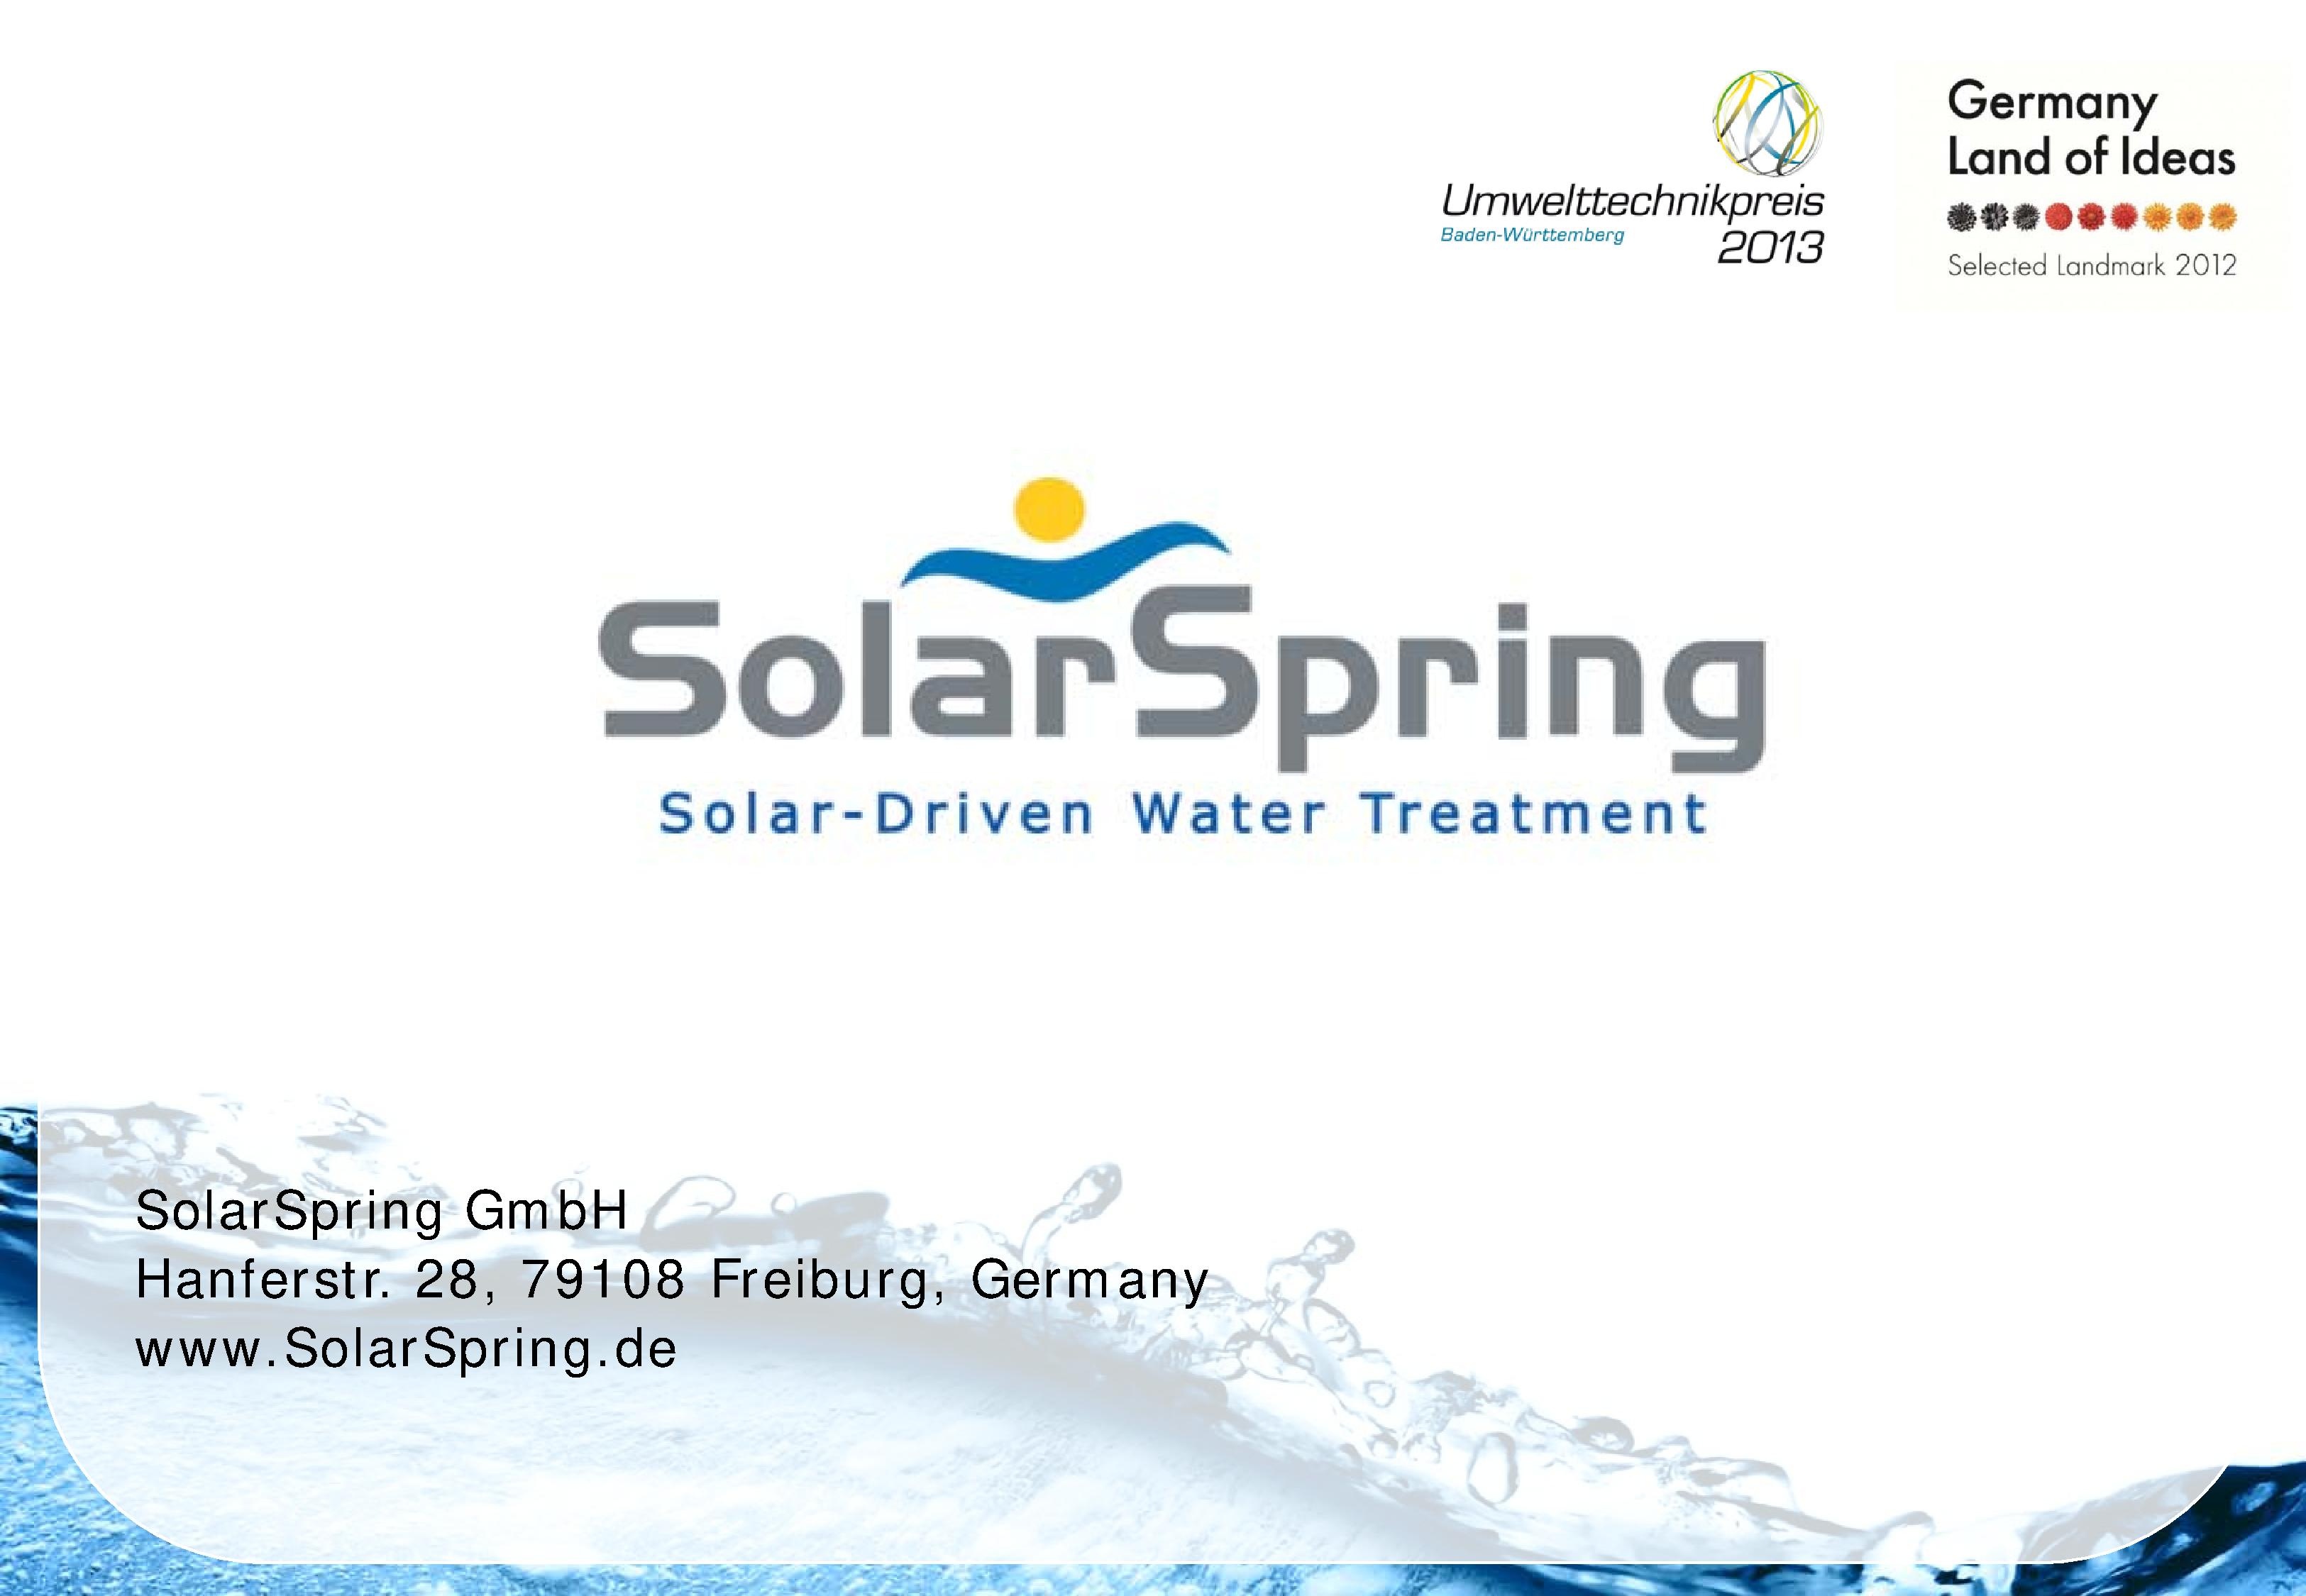 Solar-Driven Water Treatment – Experiences in India